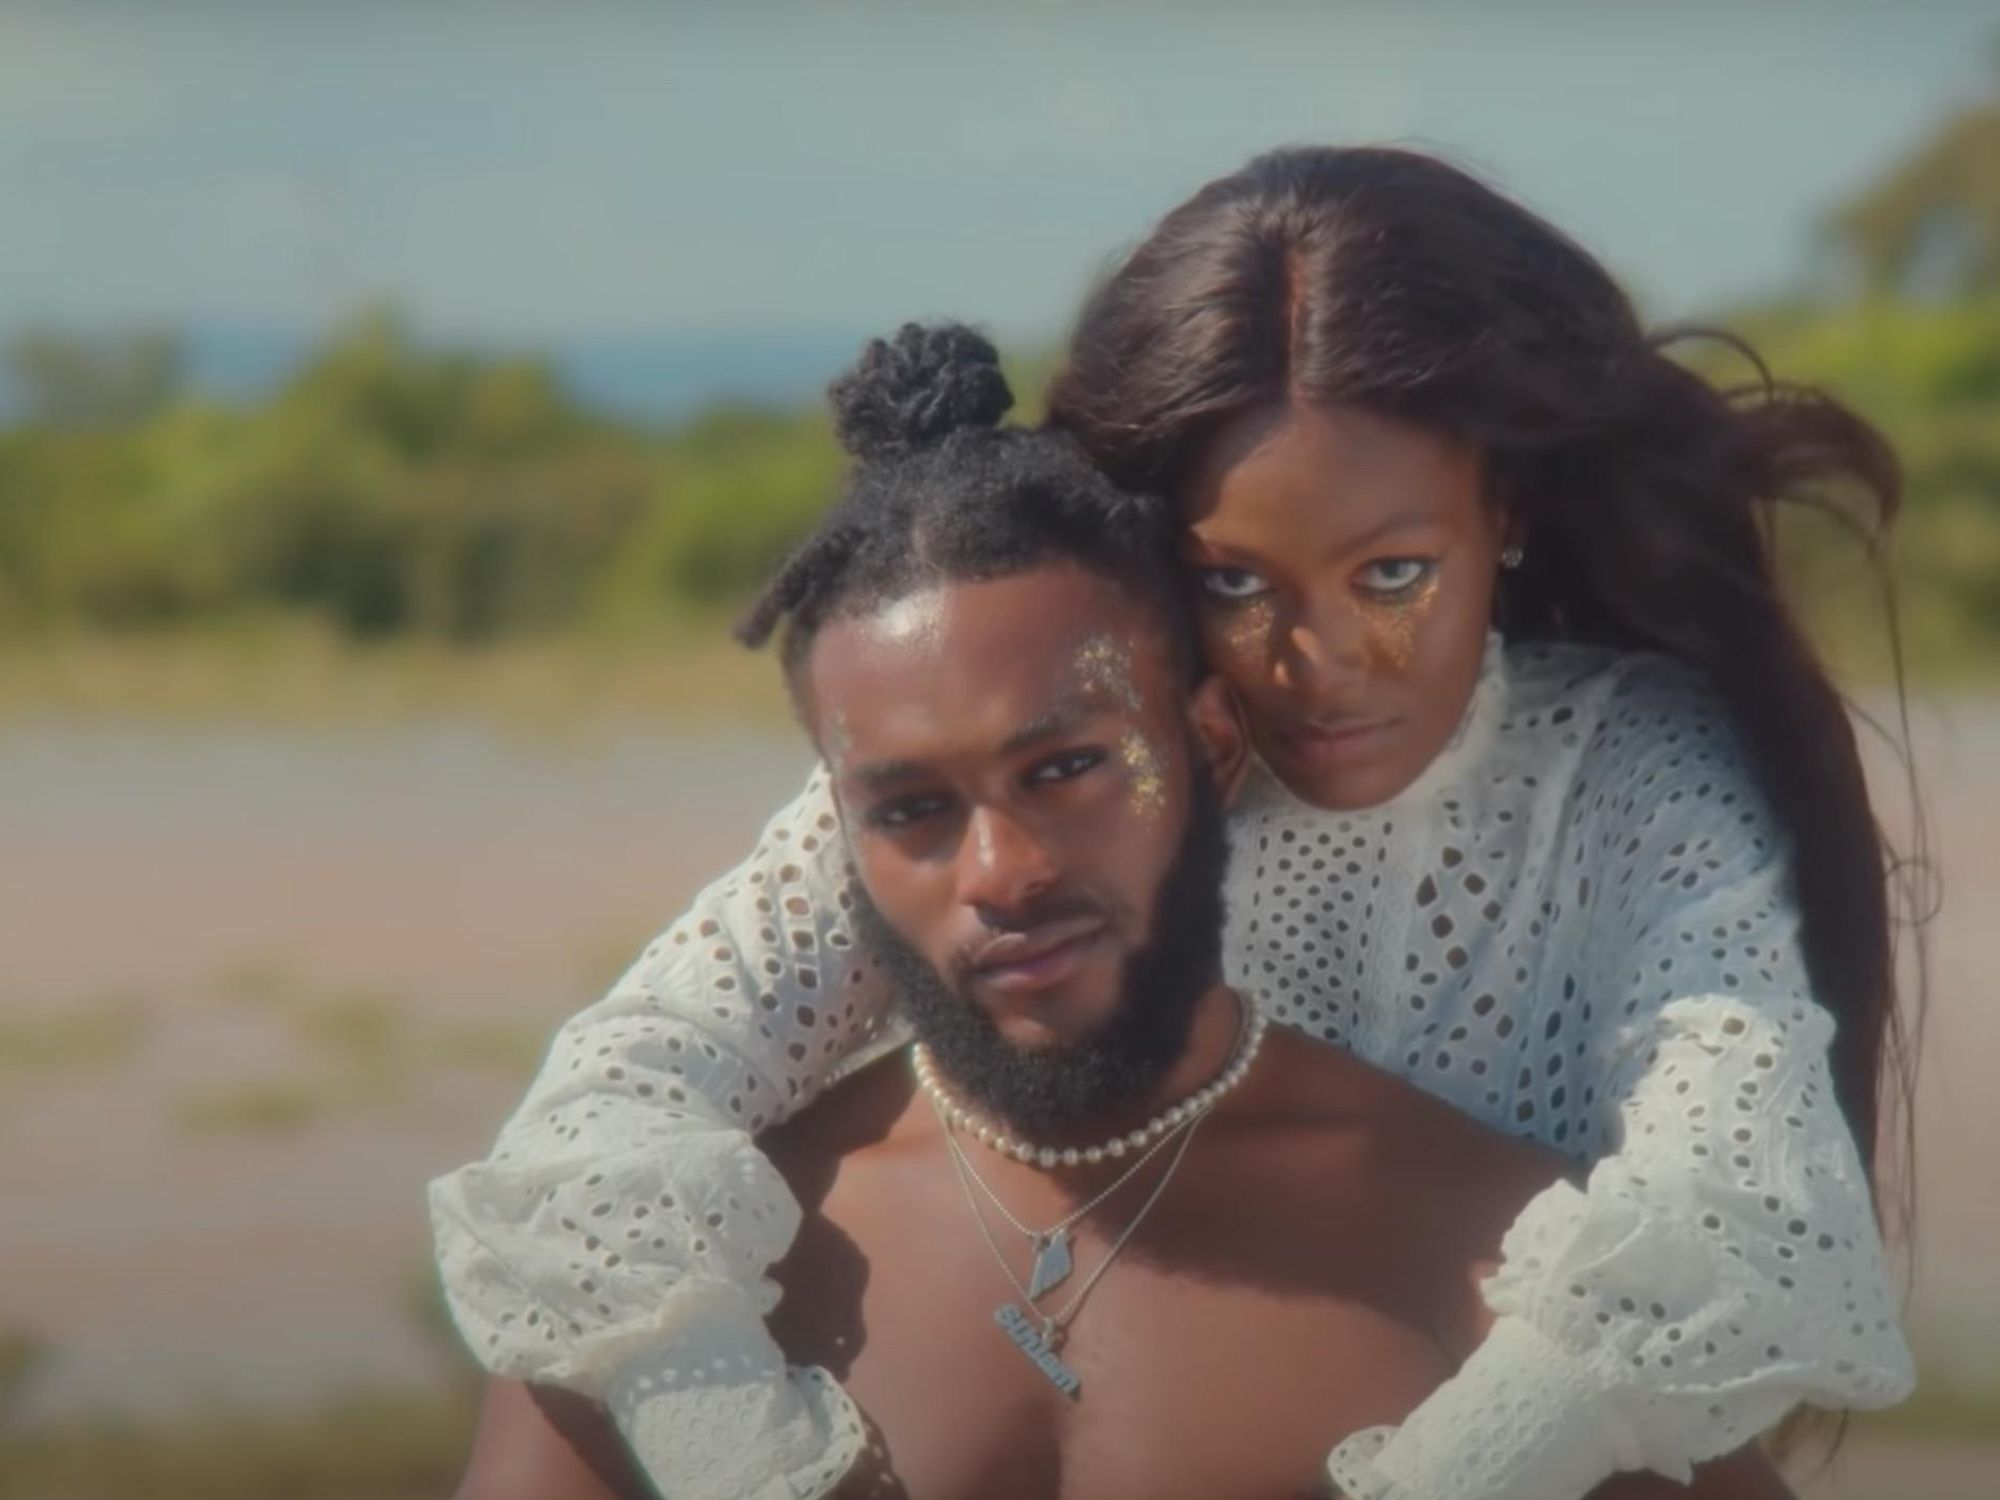 A young couple hold each other in a field in a still scene from Sarkodie's new music video.